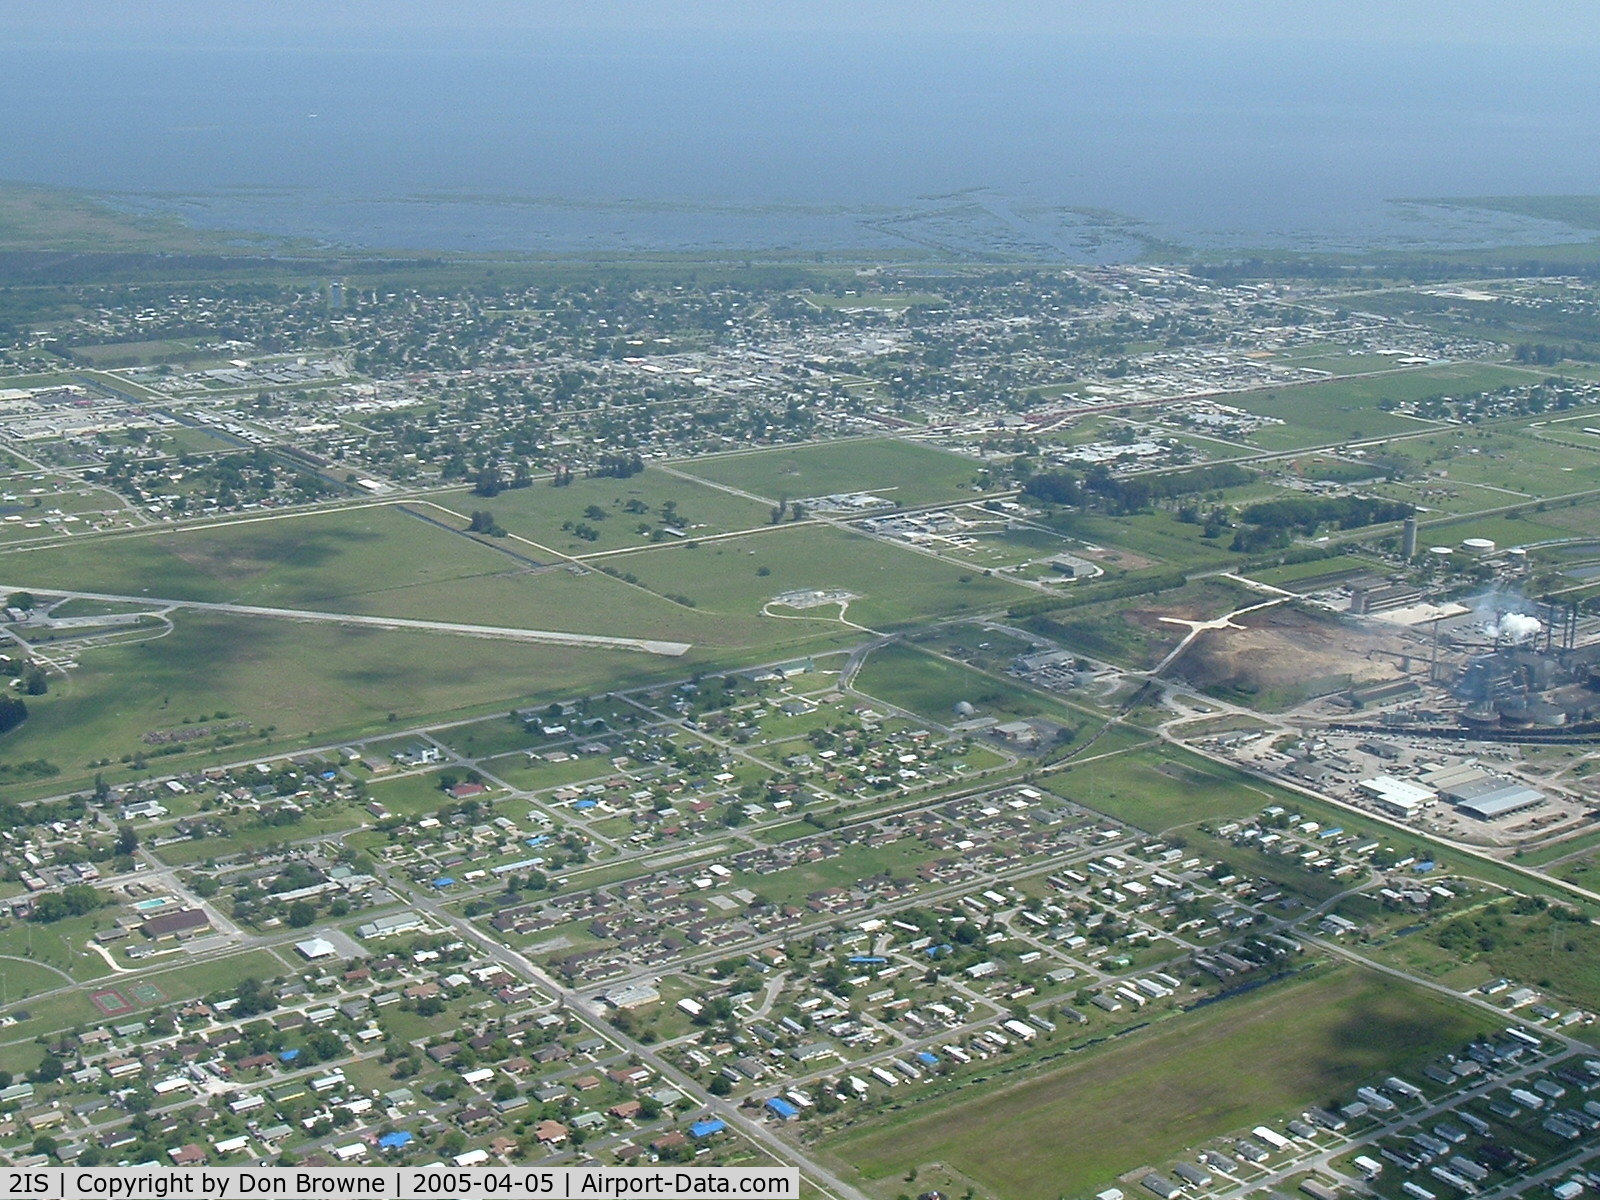 Airglades Airport (2IS) - Old Clewiston, Fl. Airport at Lake Okeechobee - closed in 1980s (U.S. Sugar plant at right)